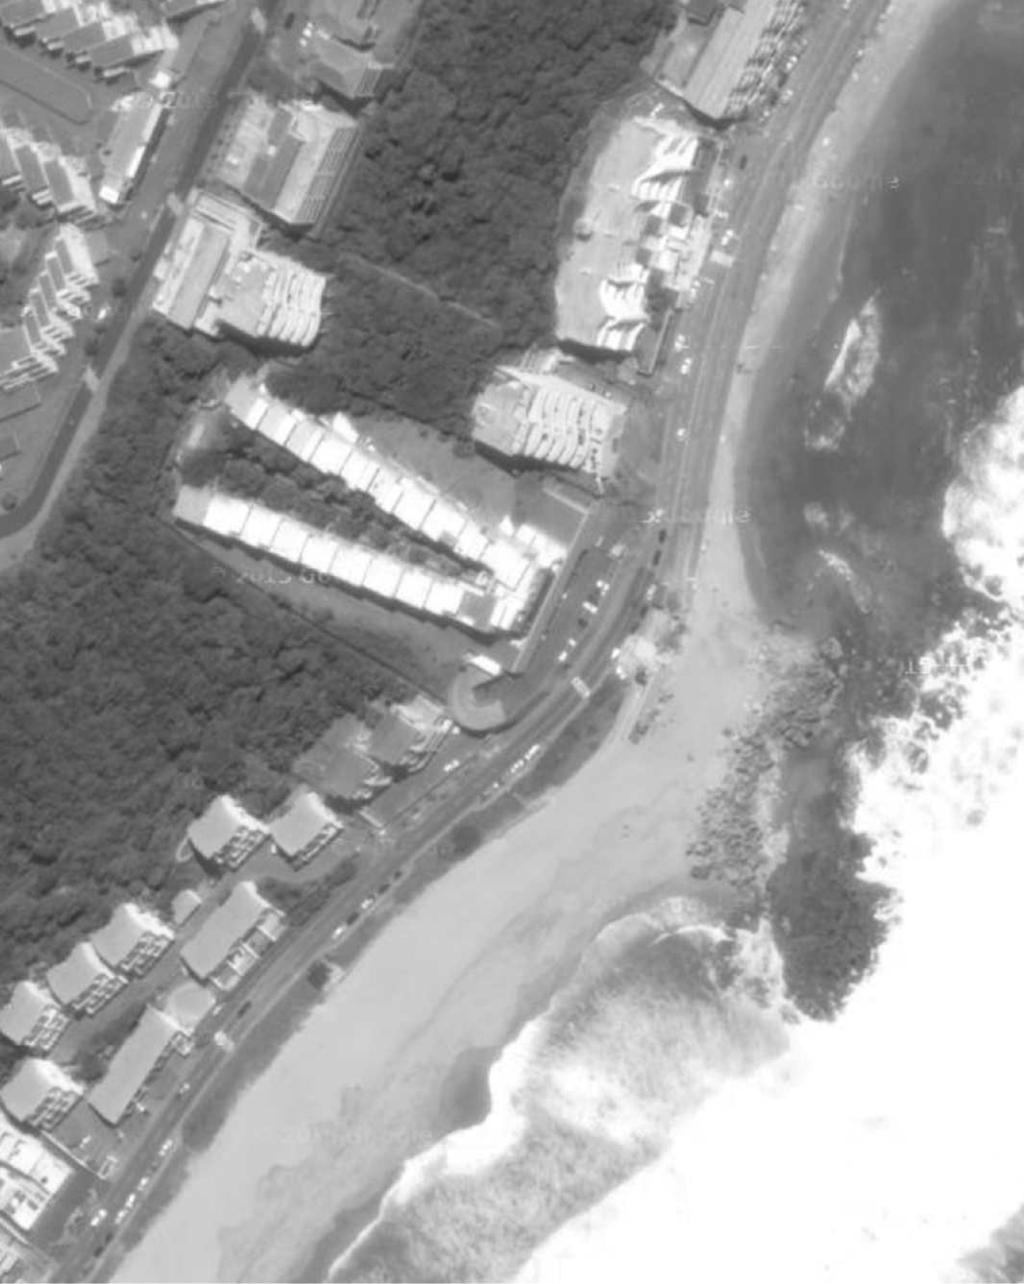 LOCATION OF THE TOWER - elevated site allows good visibility of the beach - the road level at this point is higher than the